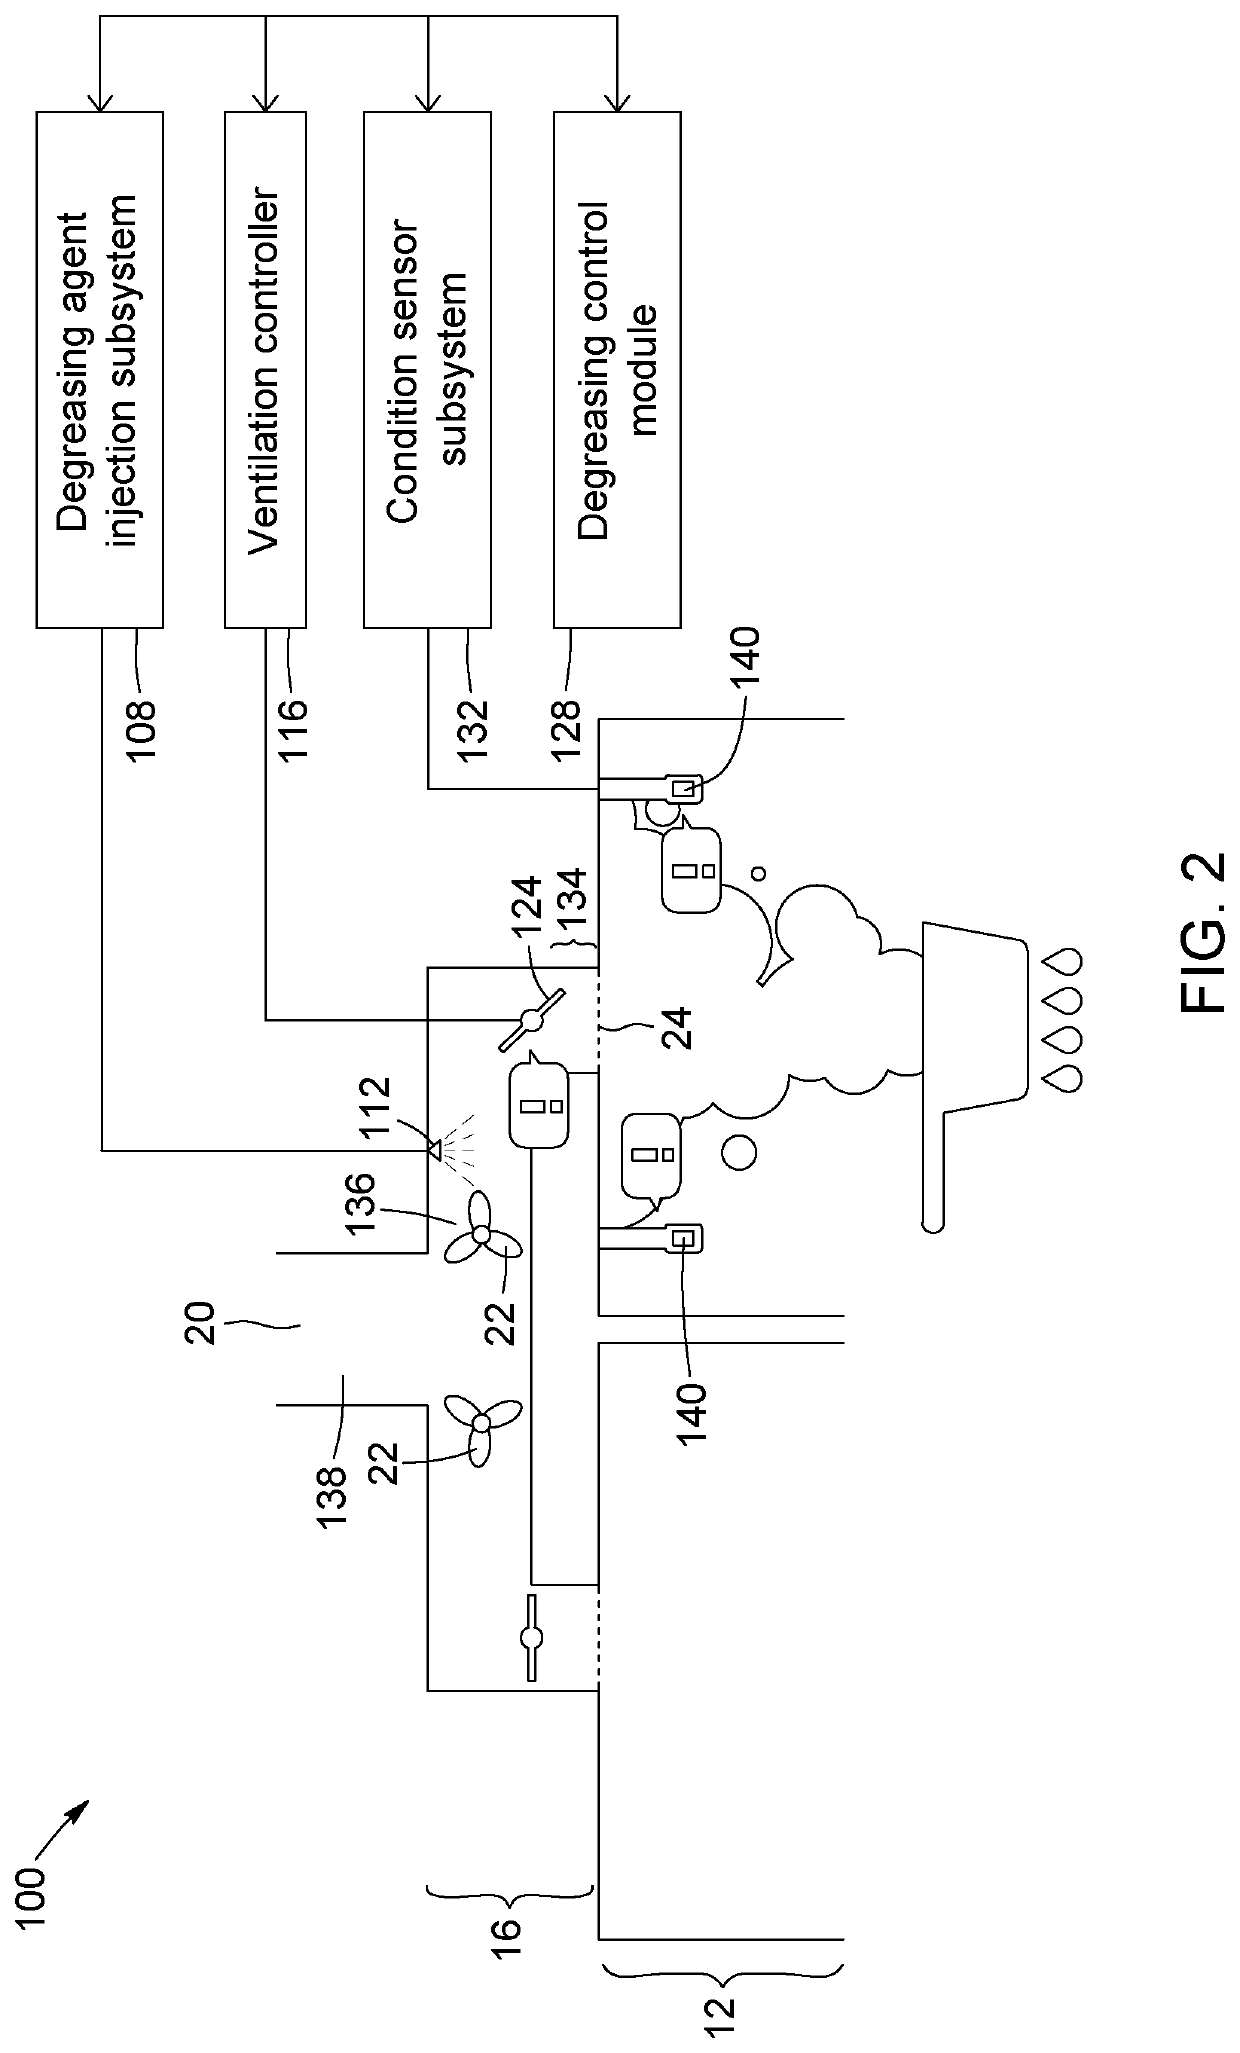 System and method for controlling degreasing of a kitchen ventilation system